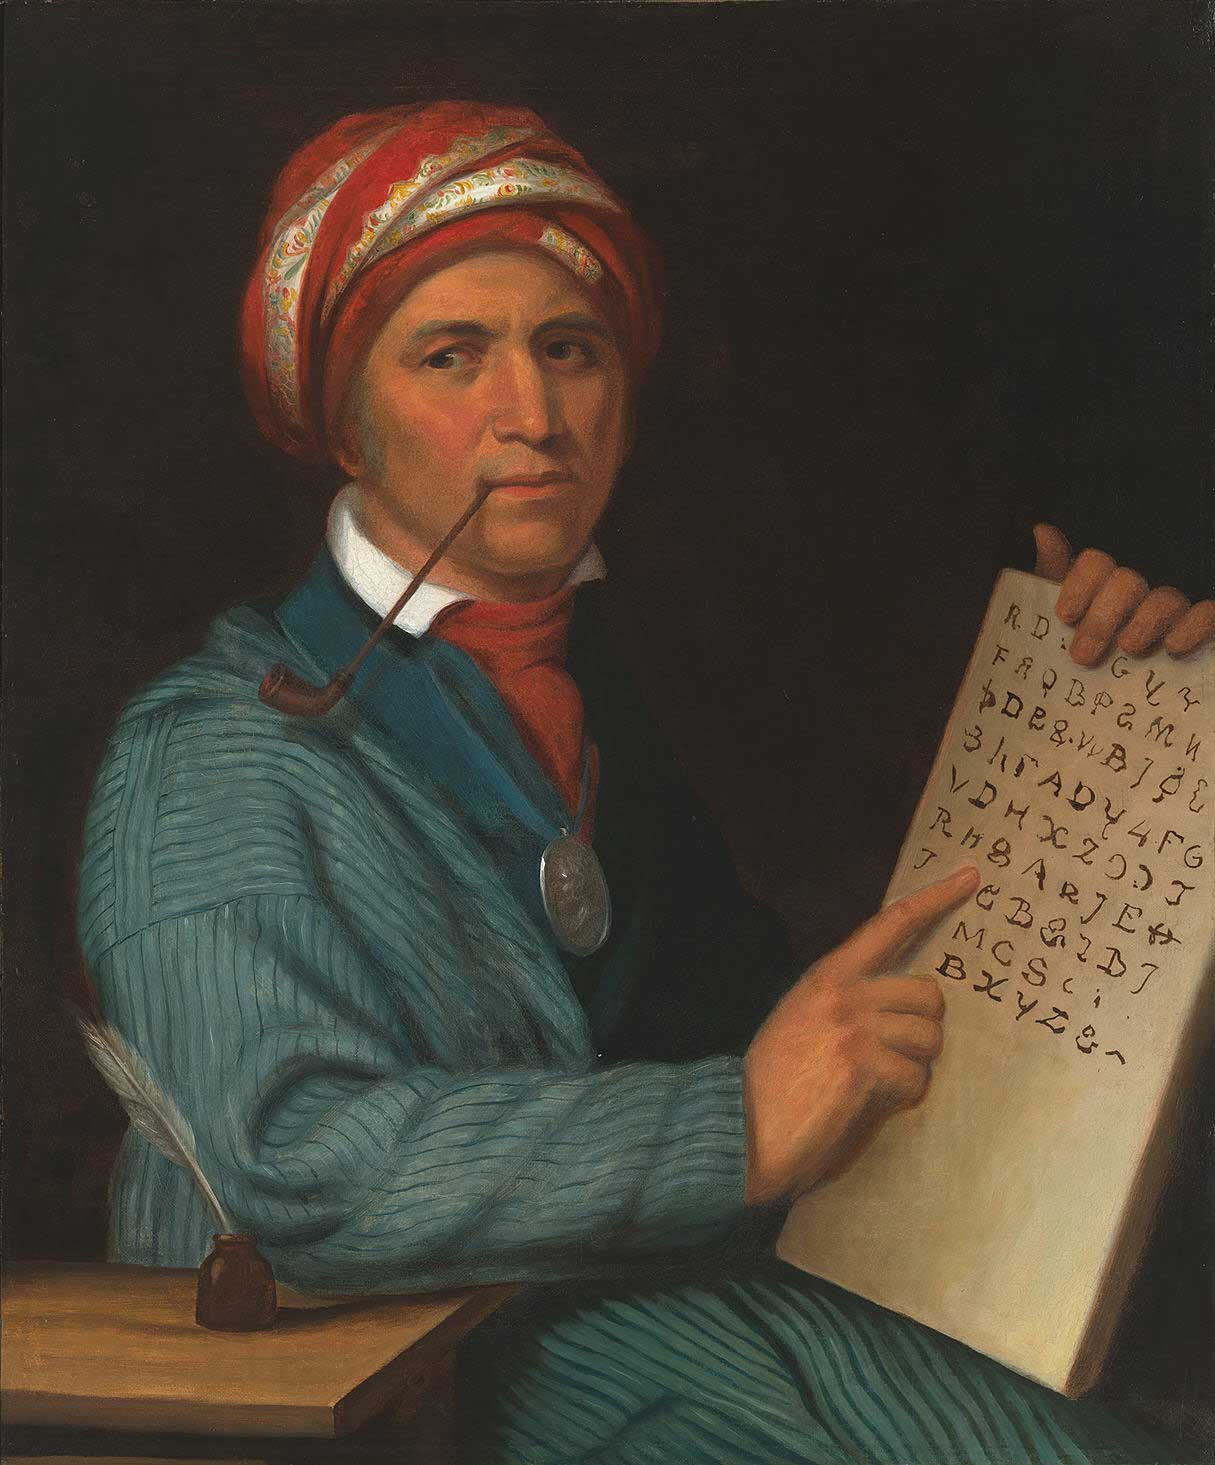 Painting of a man holding a book and looking at the viewer